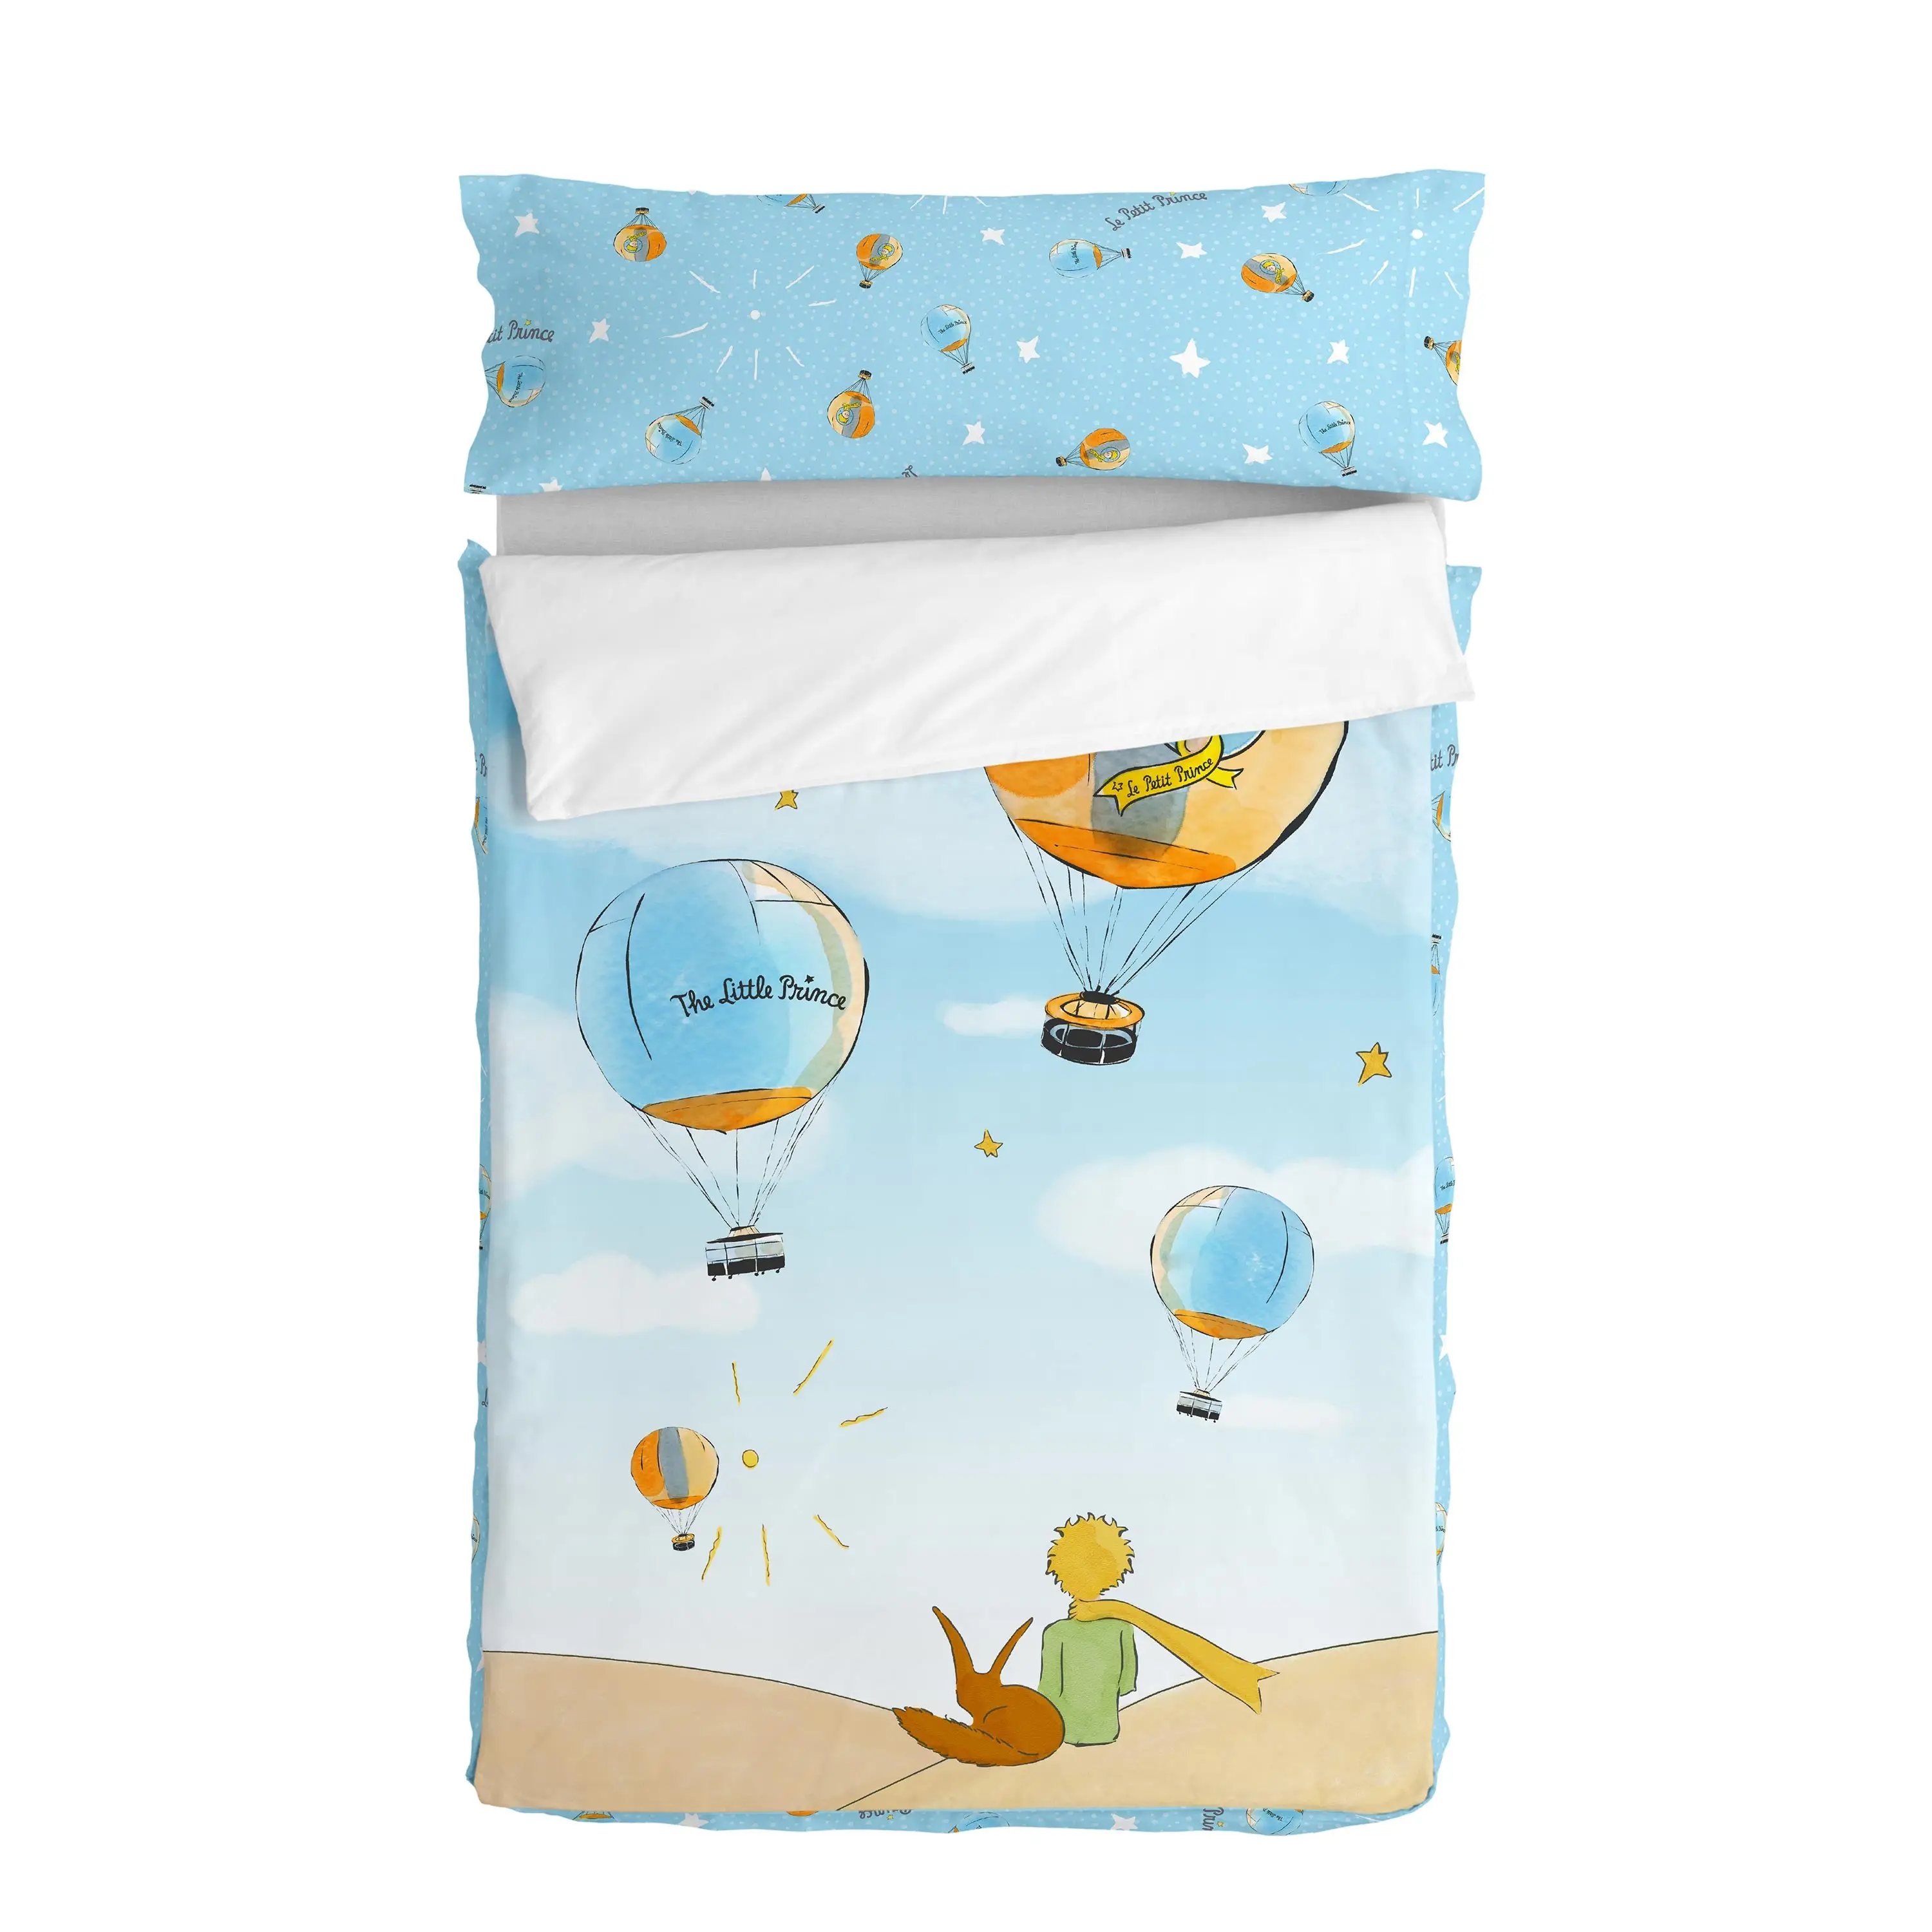 Nordic Montgolfiere sack